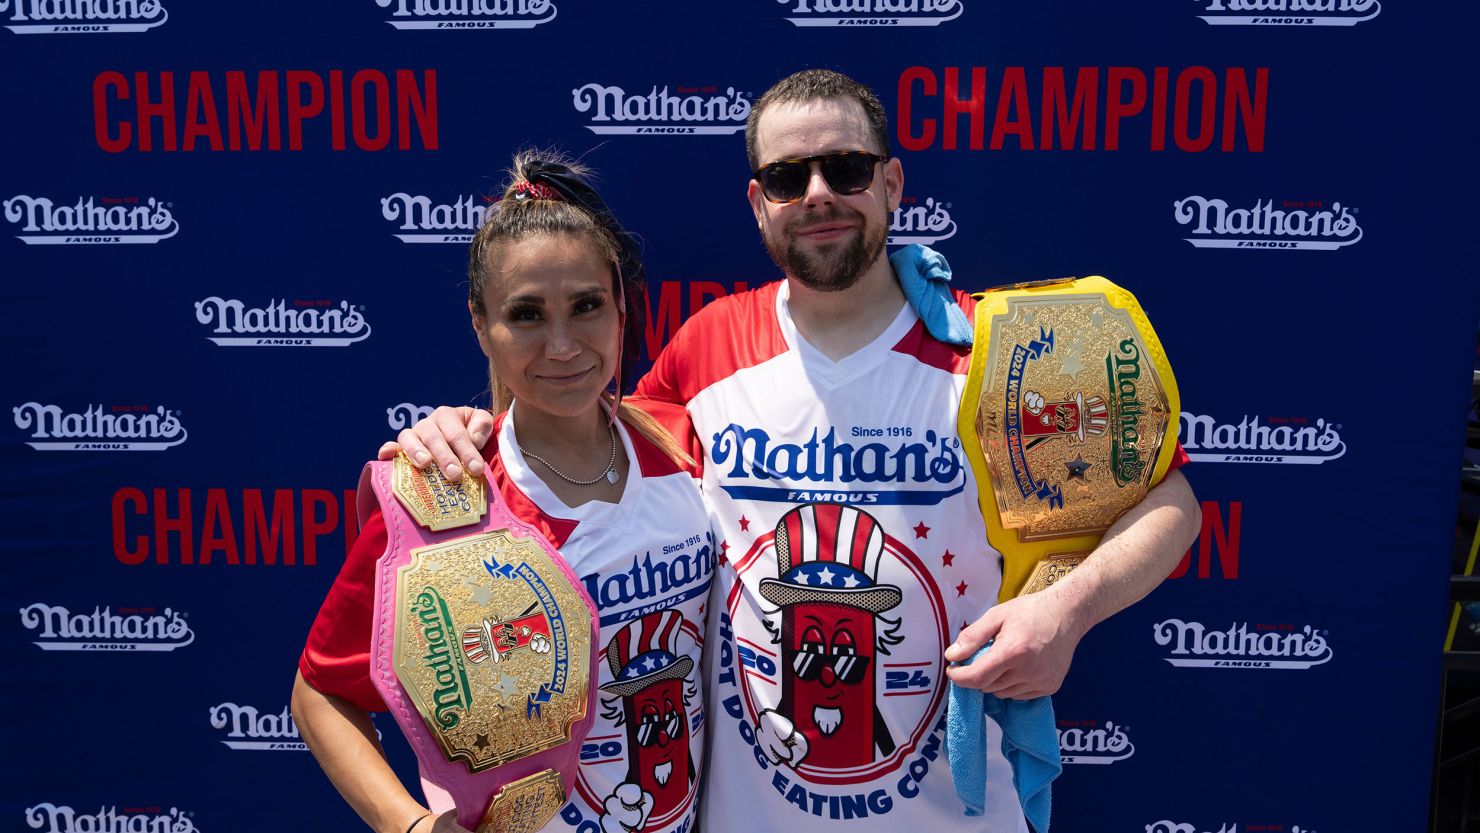 Winners Patrick Bertoletti and Miki Sudo pose for a photograph after Nathan's Famous International Hot Dog Eating Contest on July 4 in New York City.